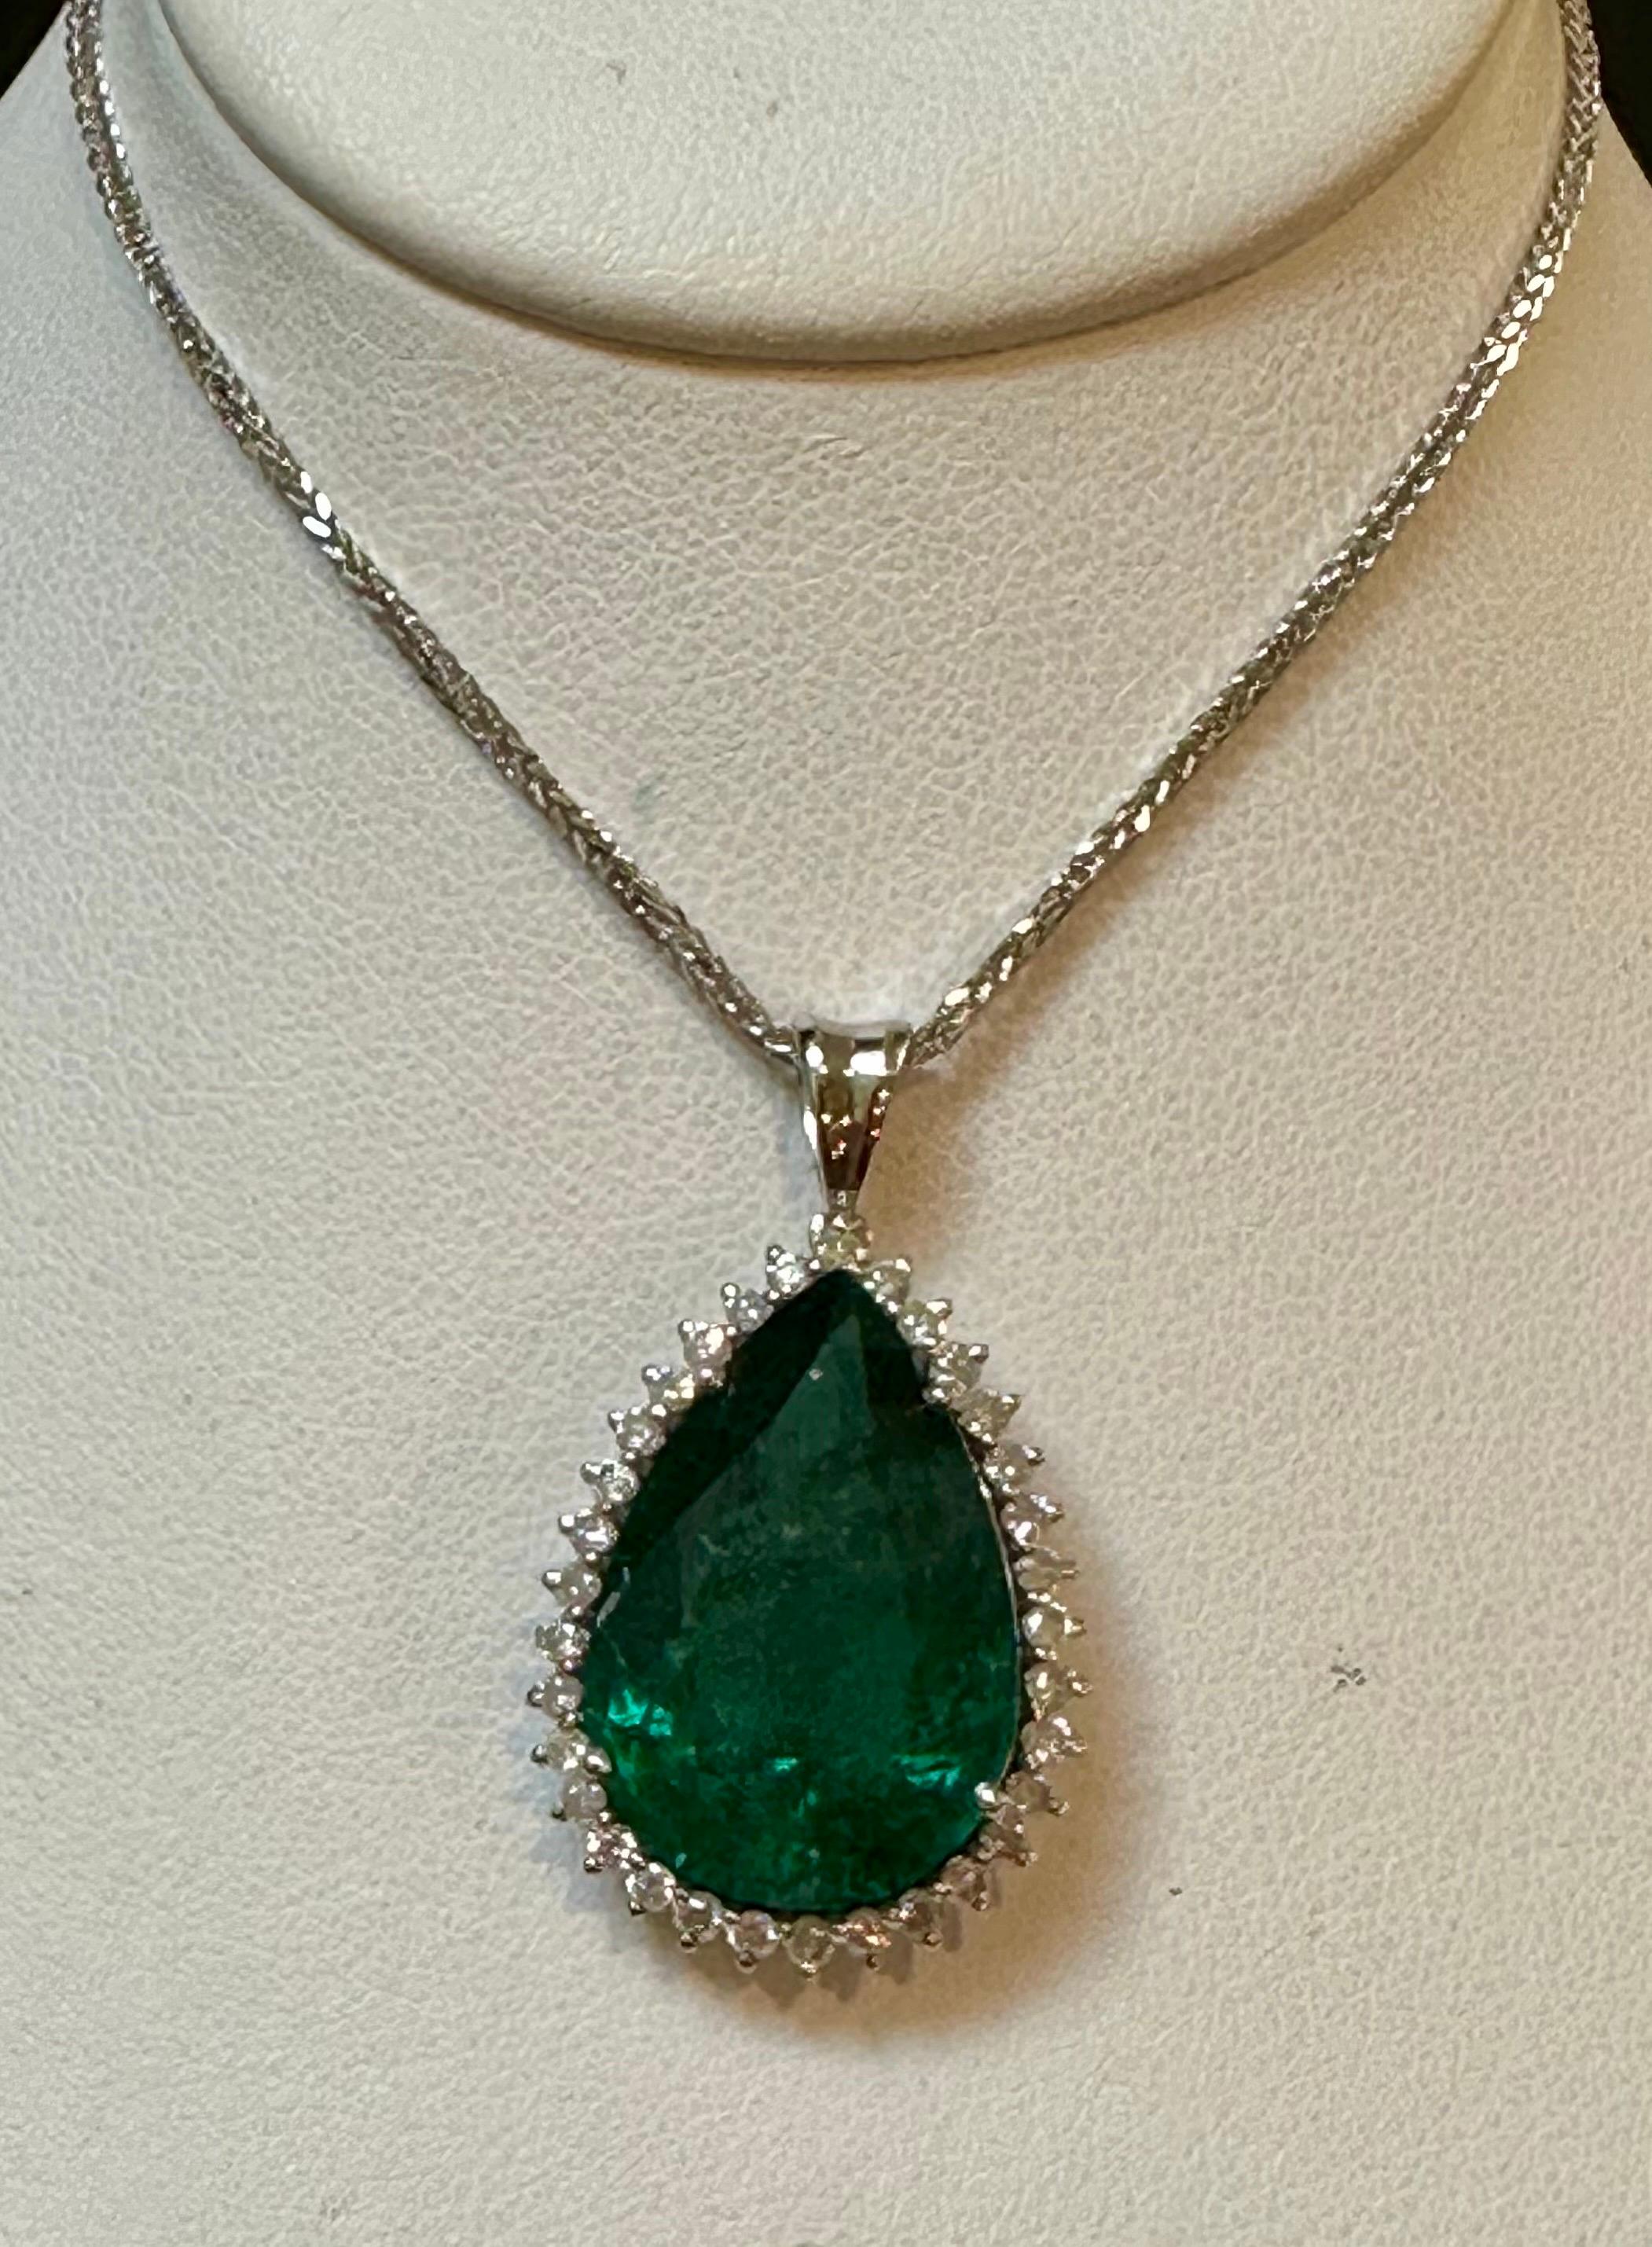 13 Ct Pear Cut Emerald & 1 Ct Diamond Halo Pendent/Necklace 14 KW Gold Chain 3